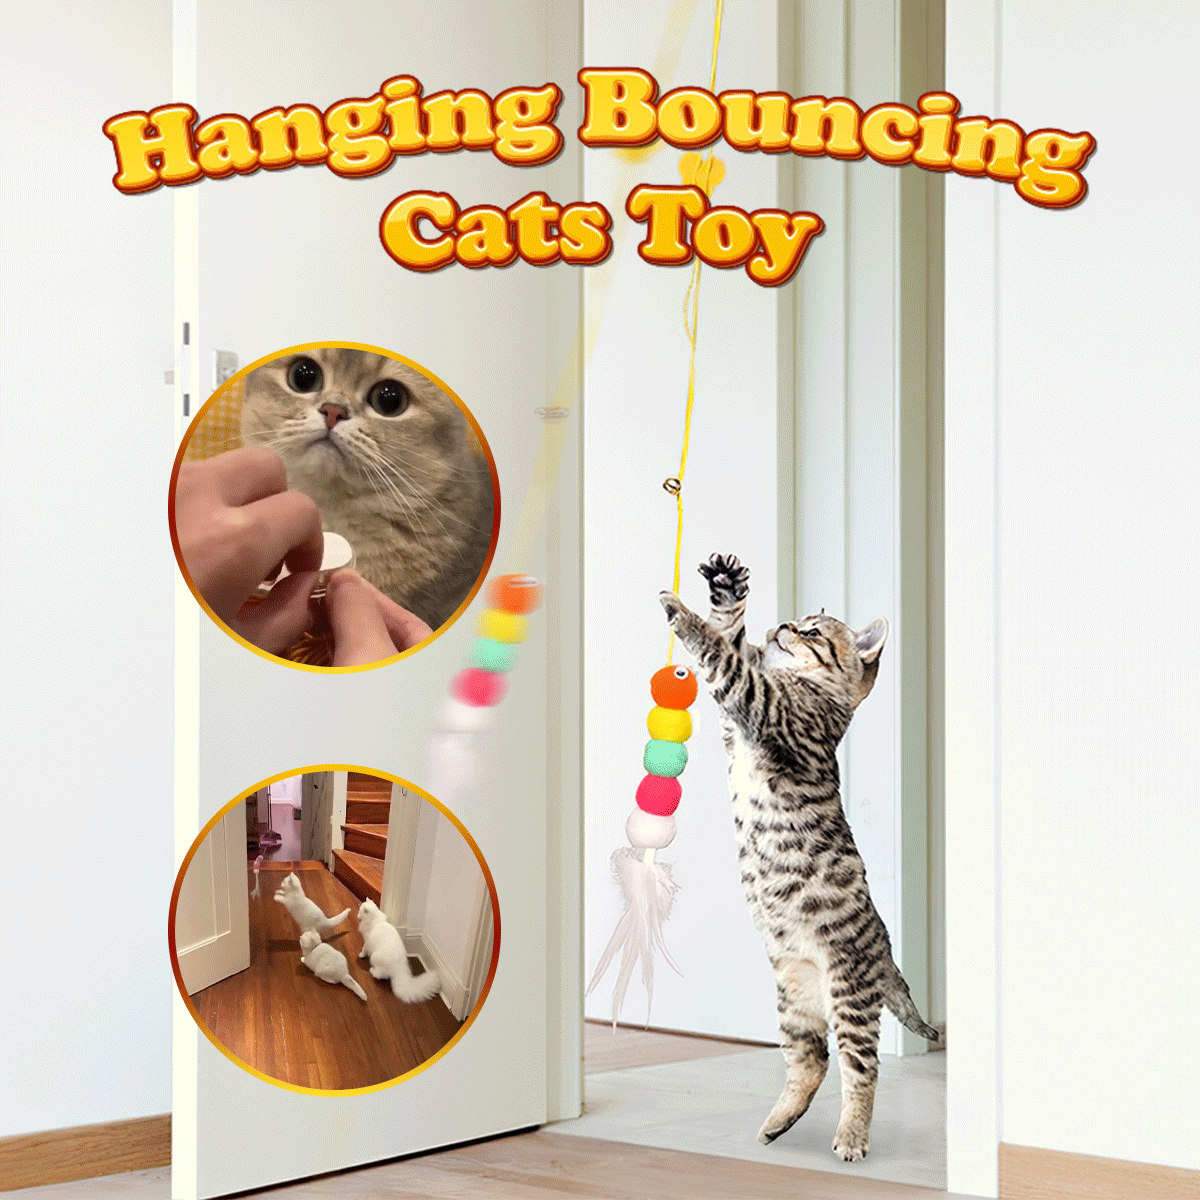 Hanging Bouncing Cats Toy | cat bouncing toy | Pets Jerry